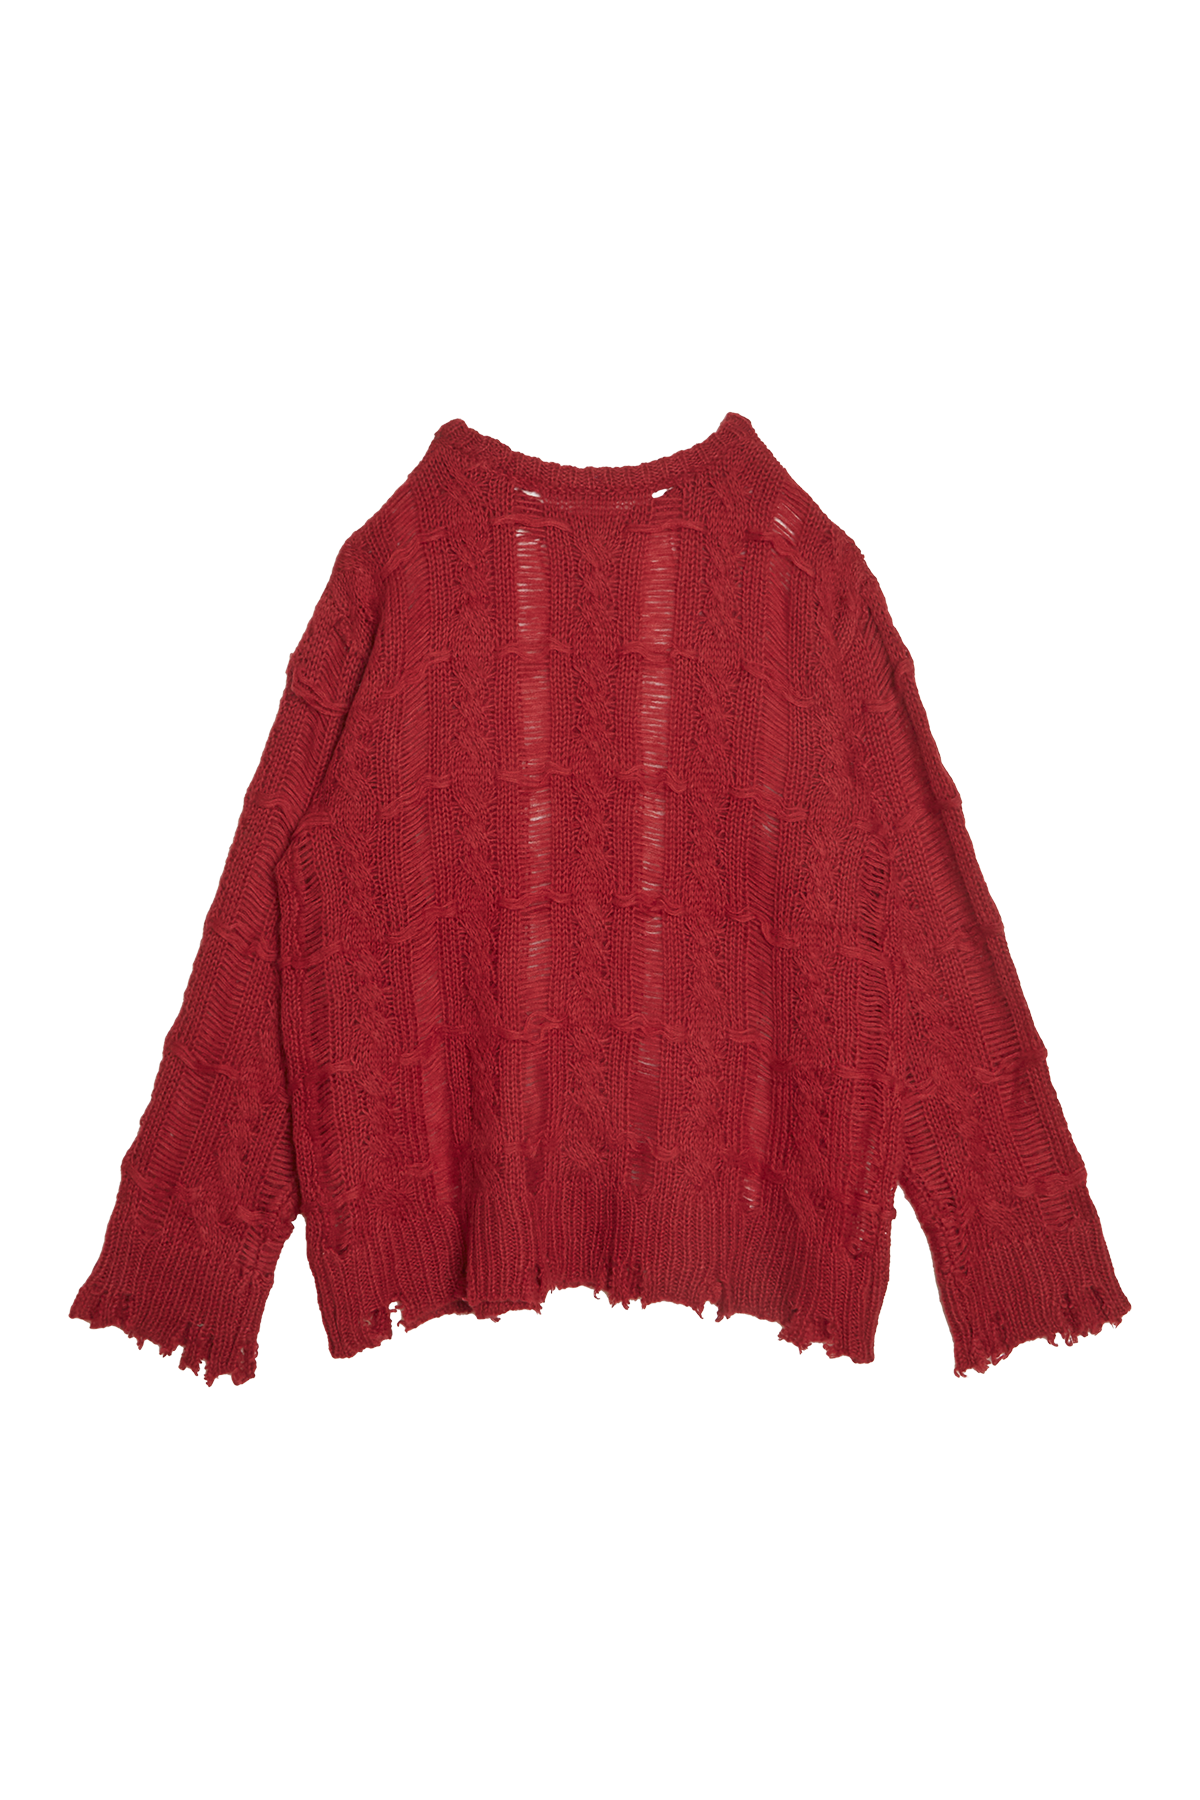 Different Wreck Knit Top / Red